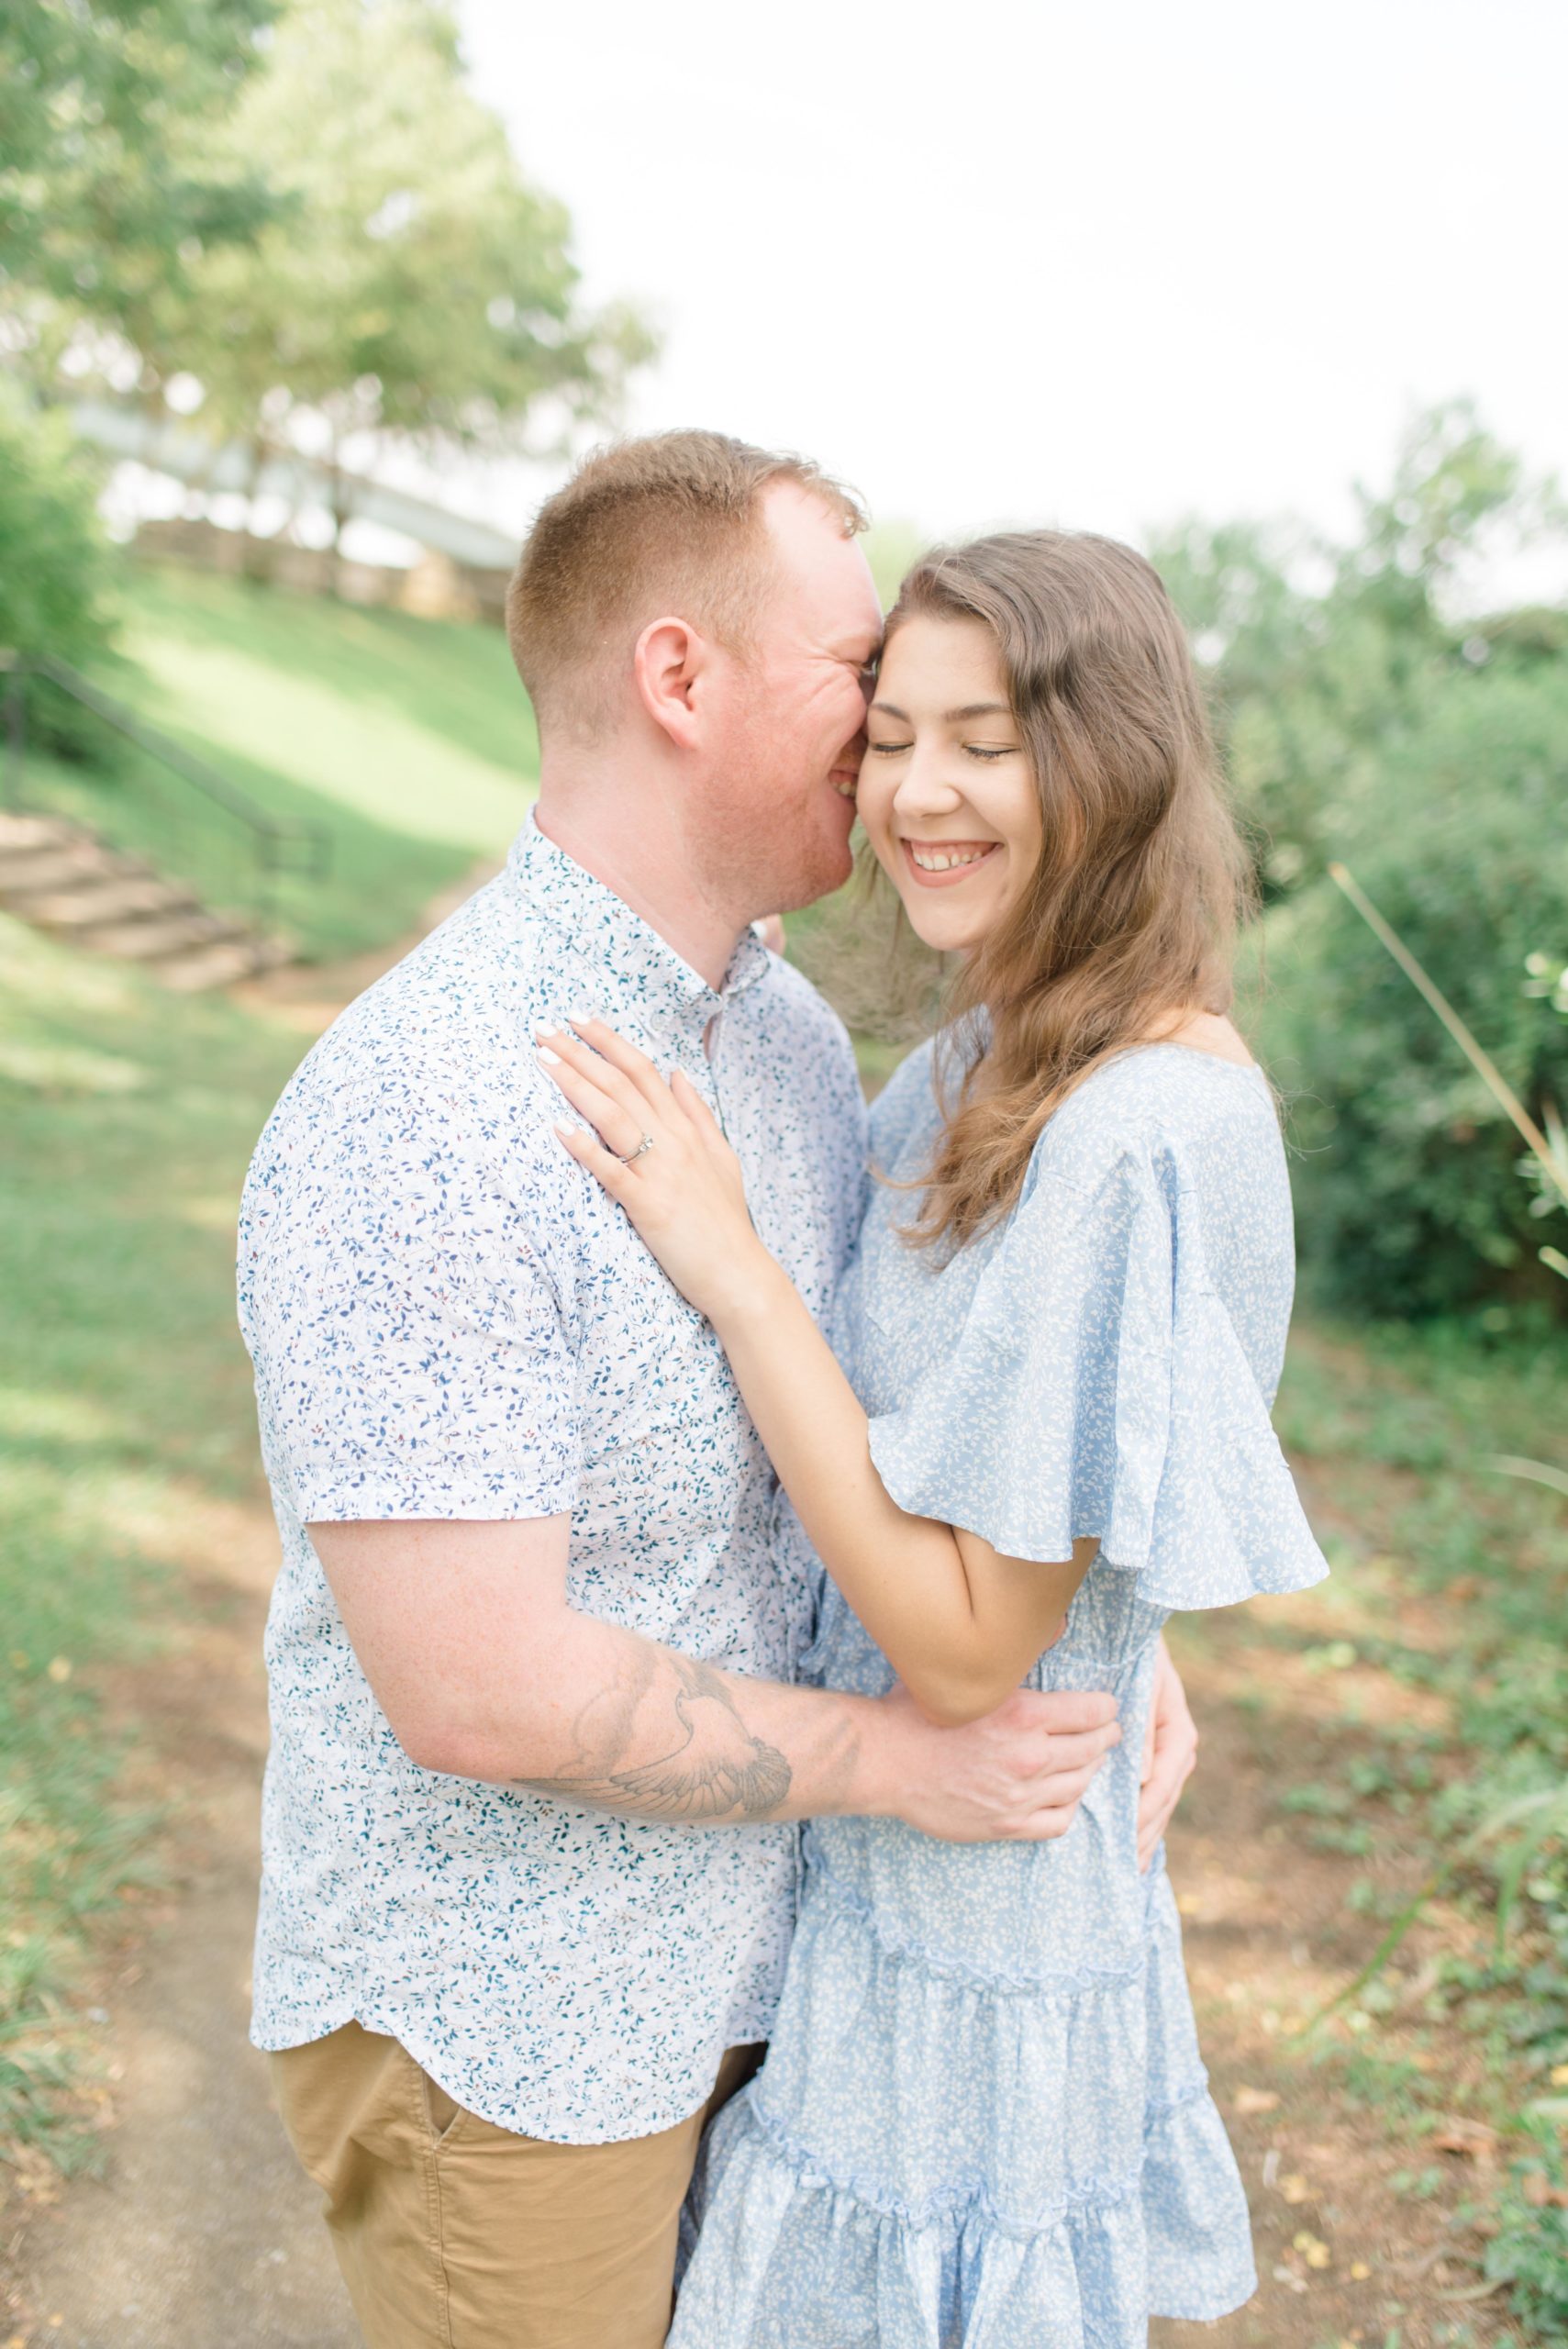 Engagement session at Jonas Greene Park in Annapolis.